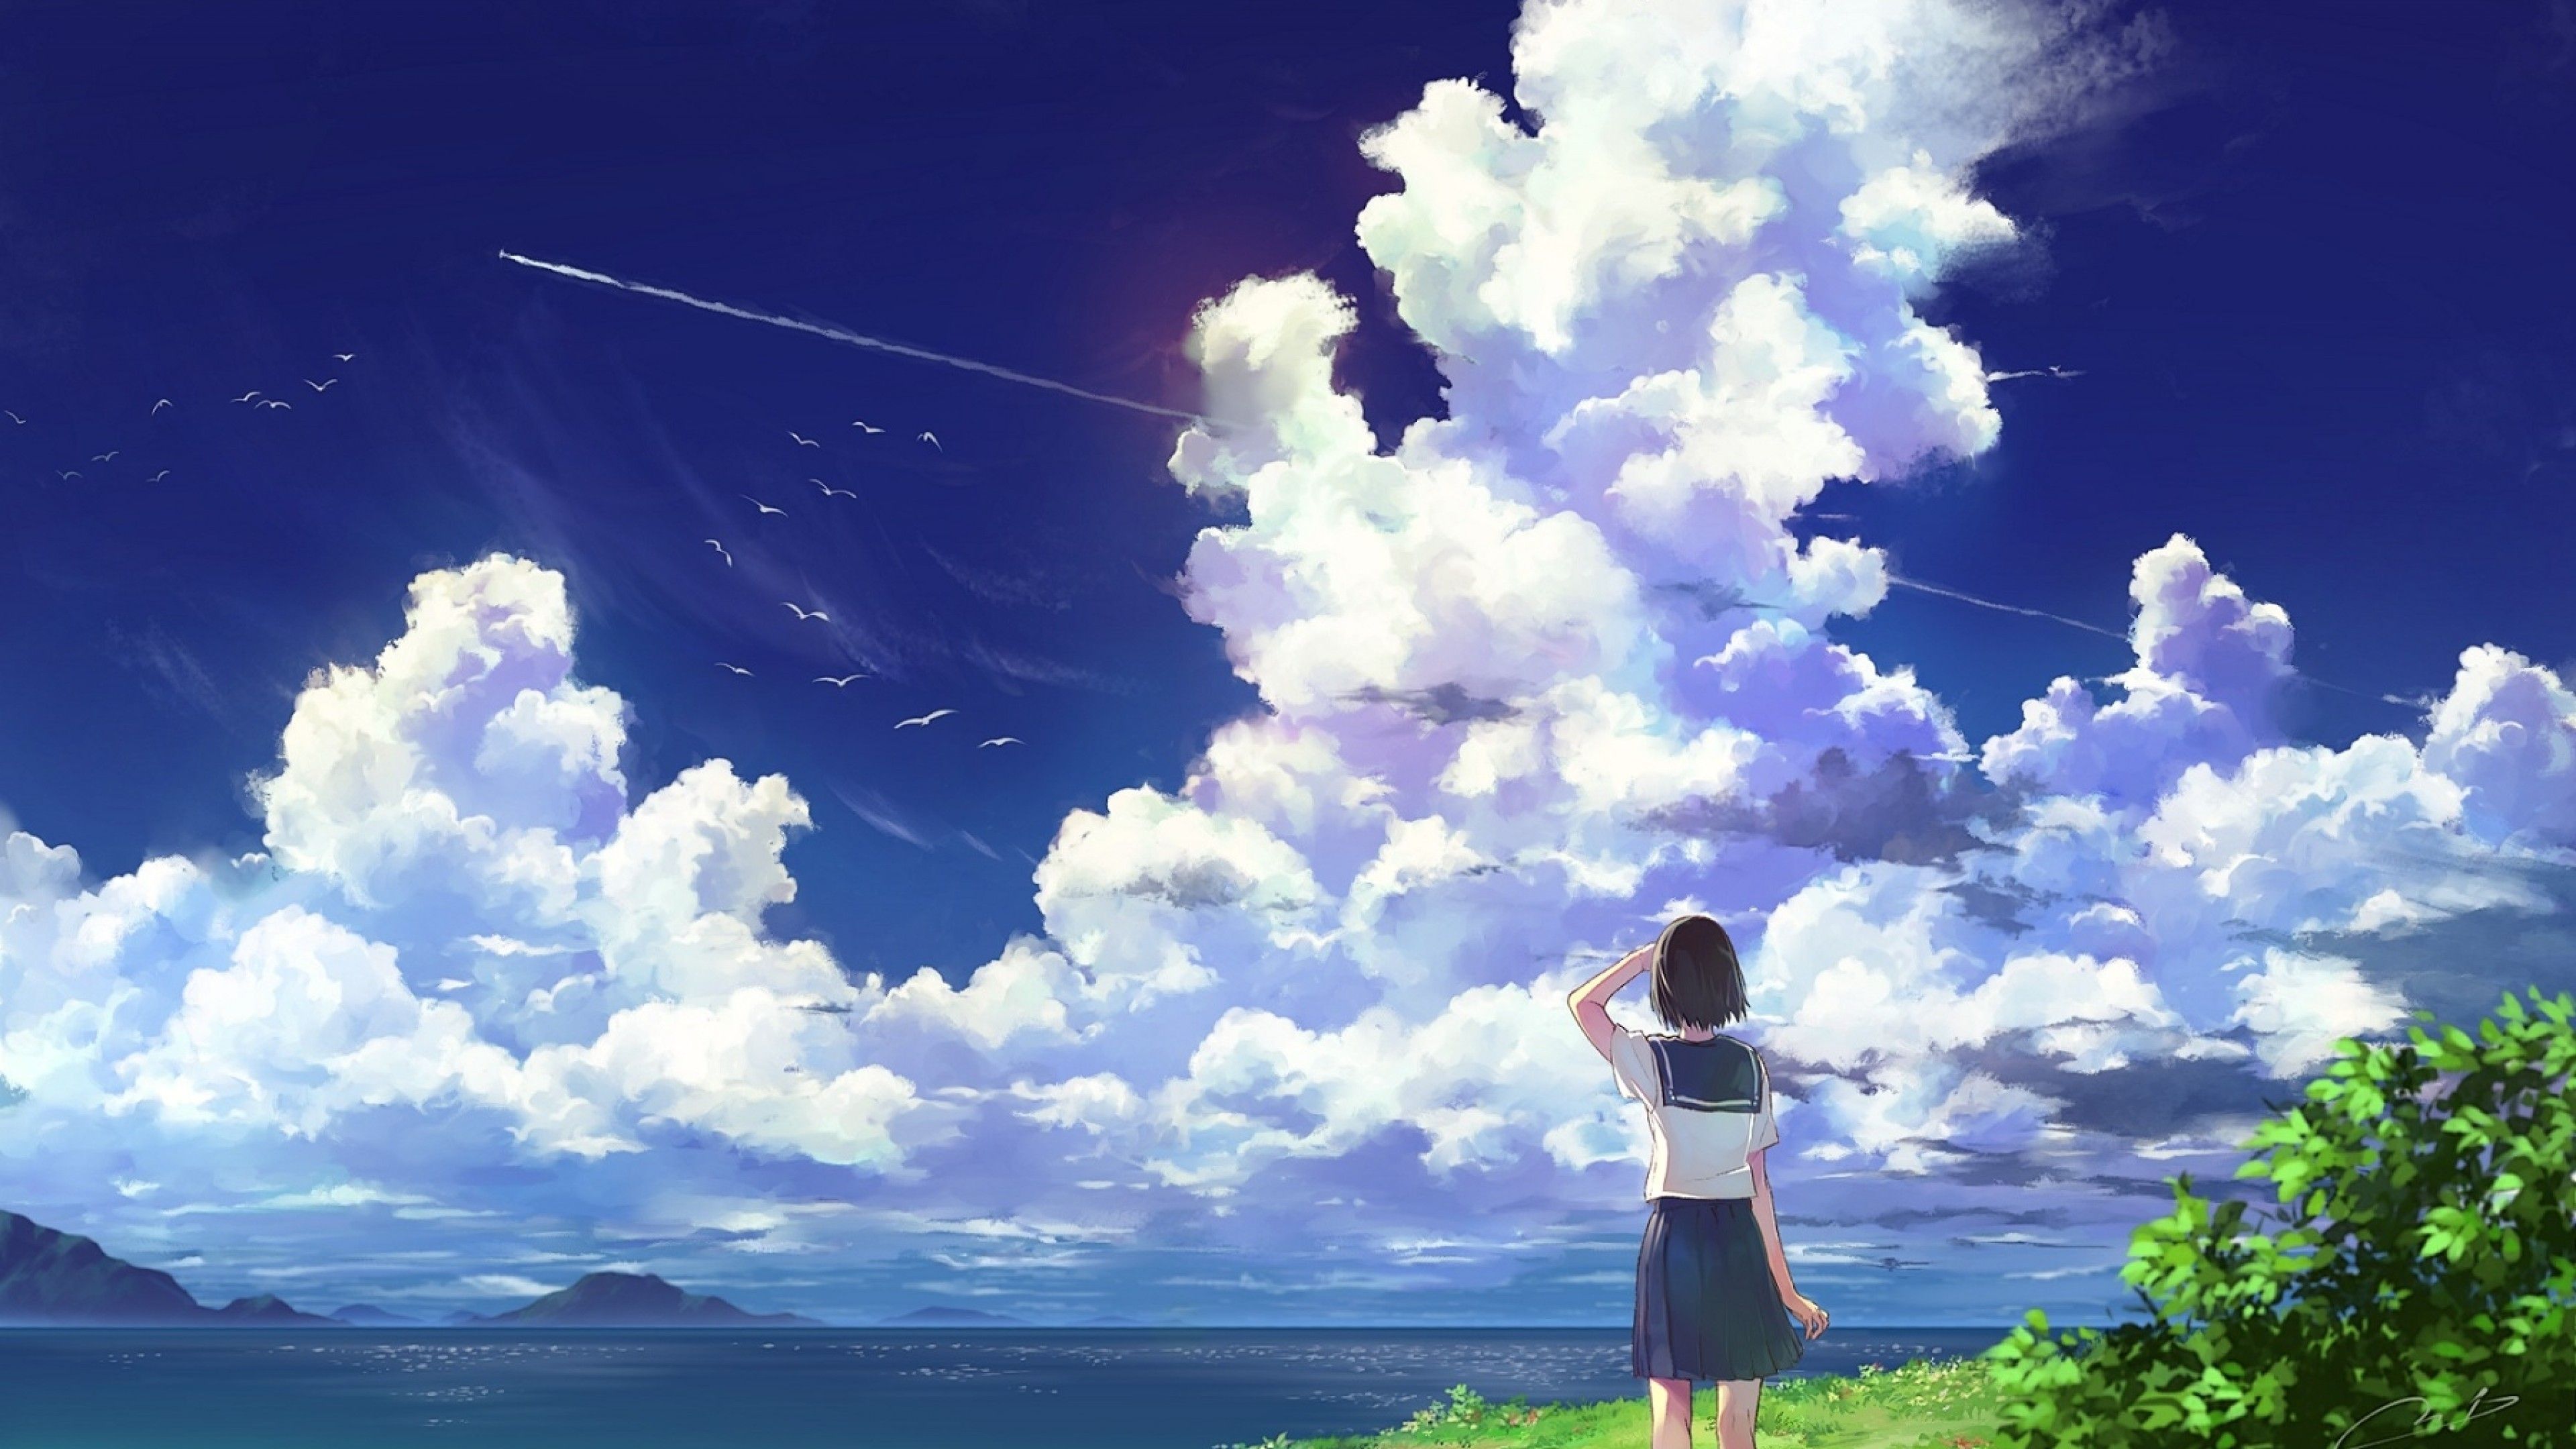 Download 3840x2160 Anime School Girl, Anime Landscape, Clouds, Scenic, Summer Wallpaper for UHD TV